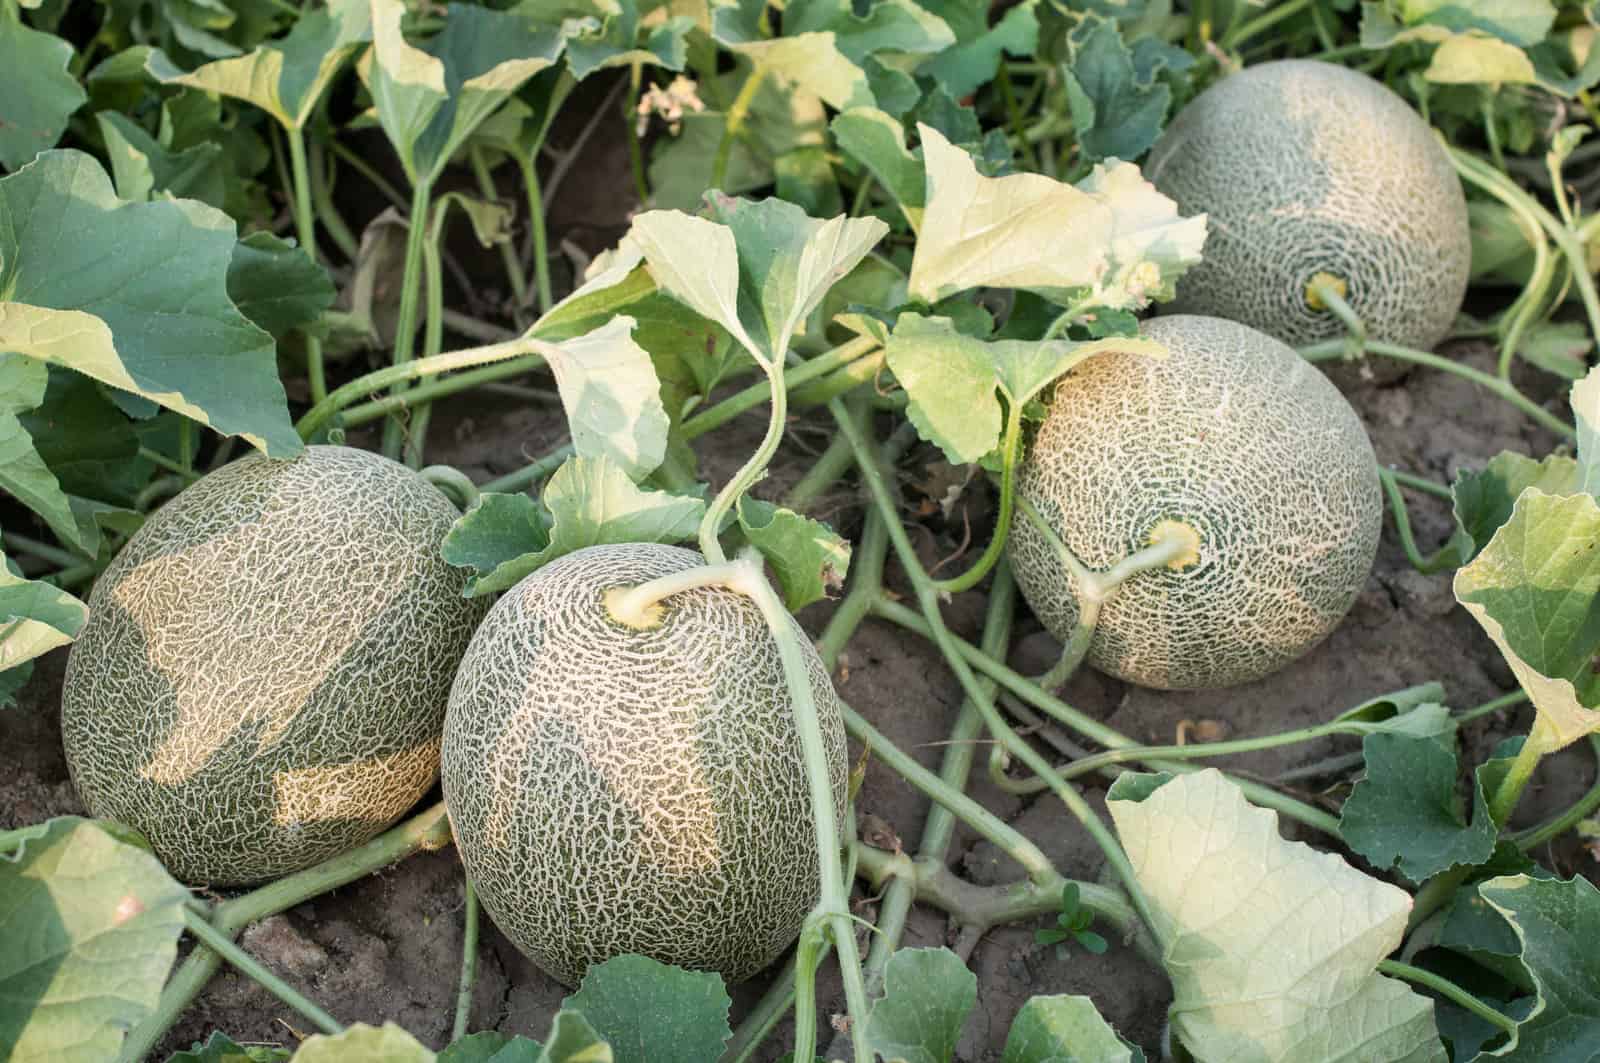 Four melons on one vine